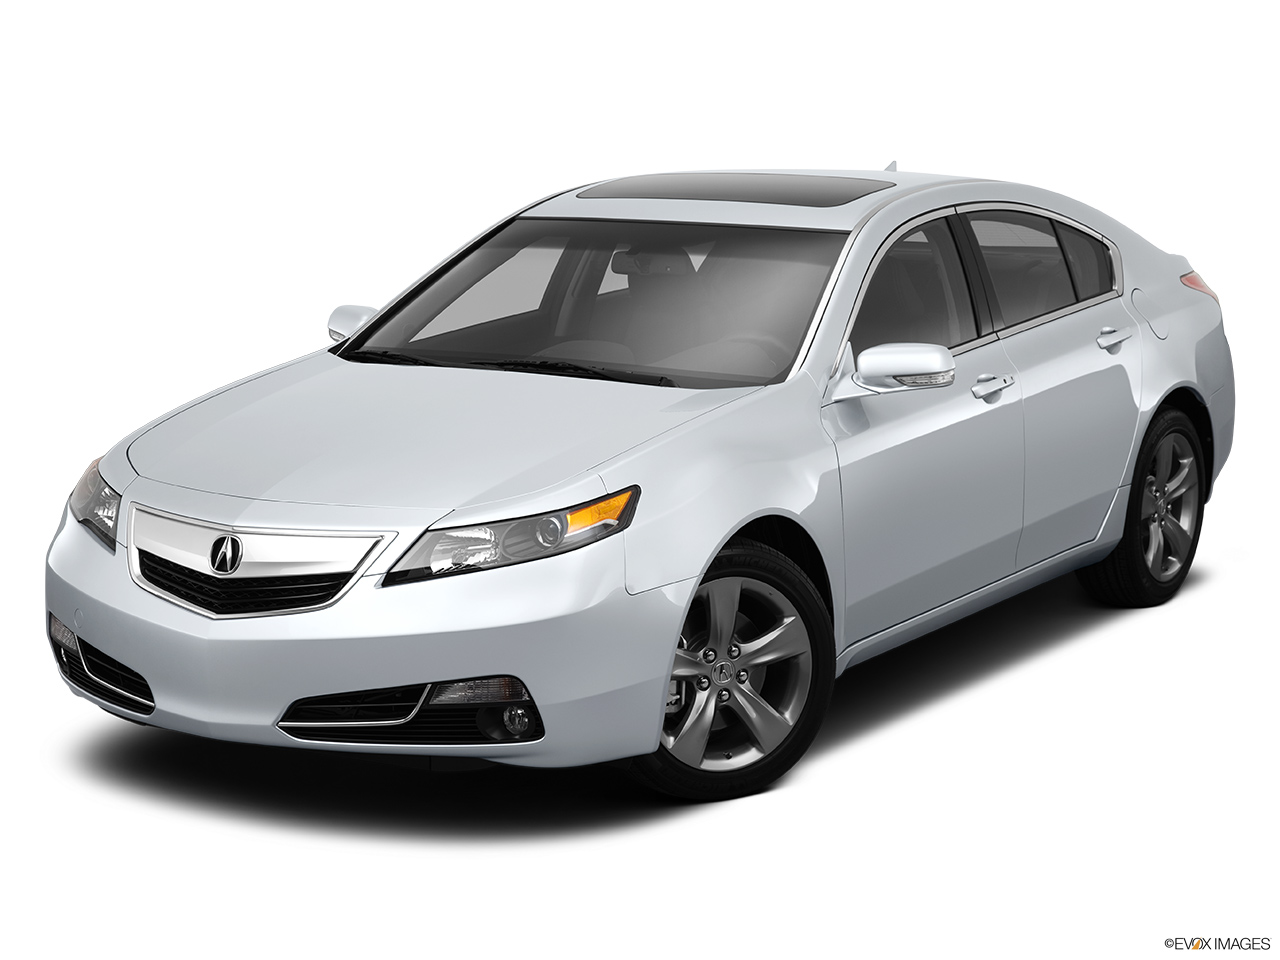 2013 Acura TL SH-AWD Front angle view. 